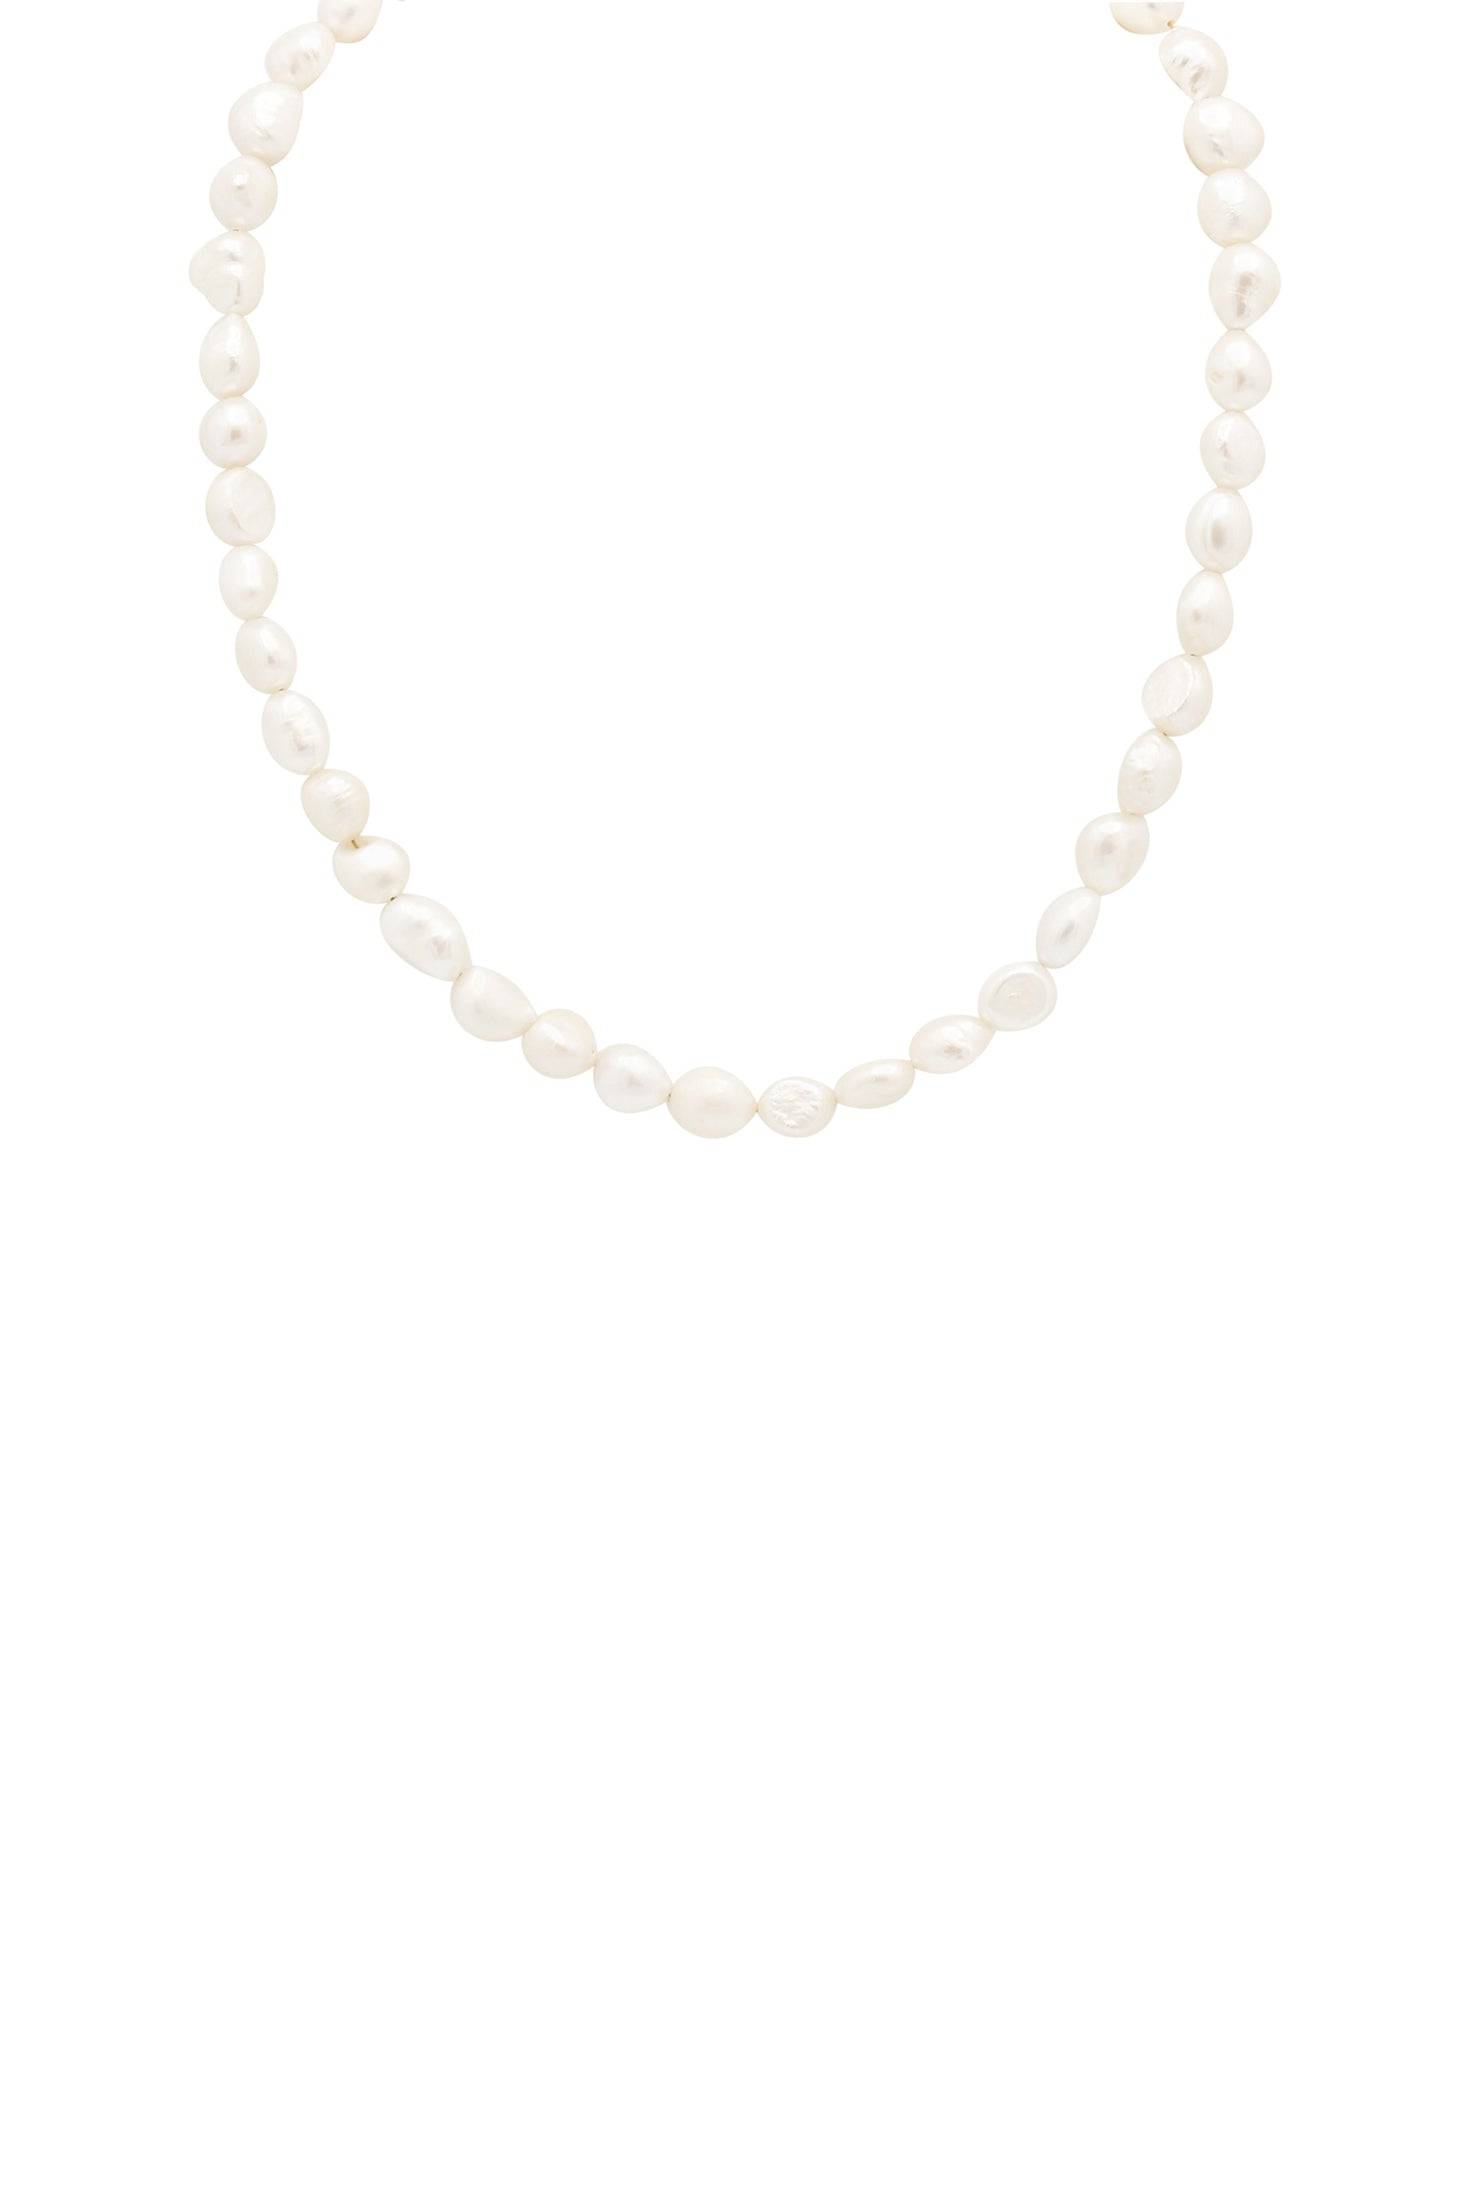 FreshWater Pearl Statement Necklace